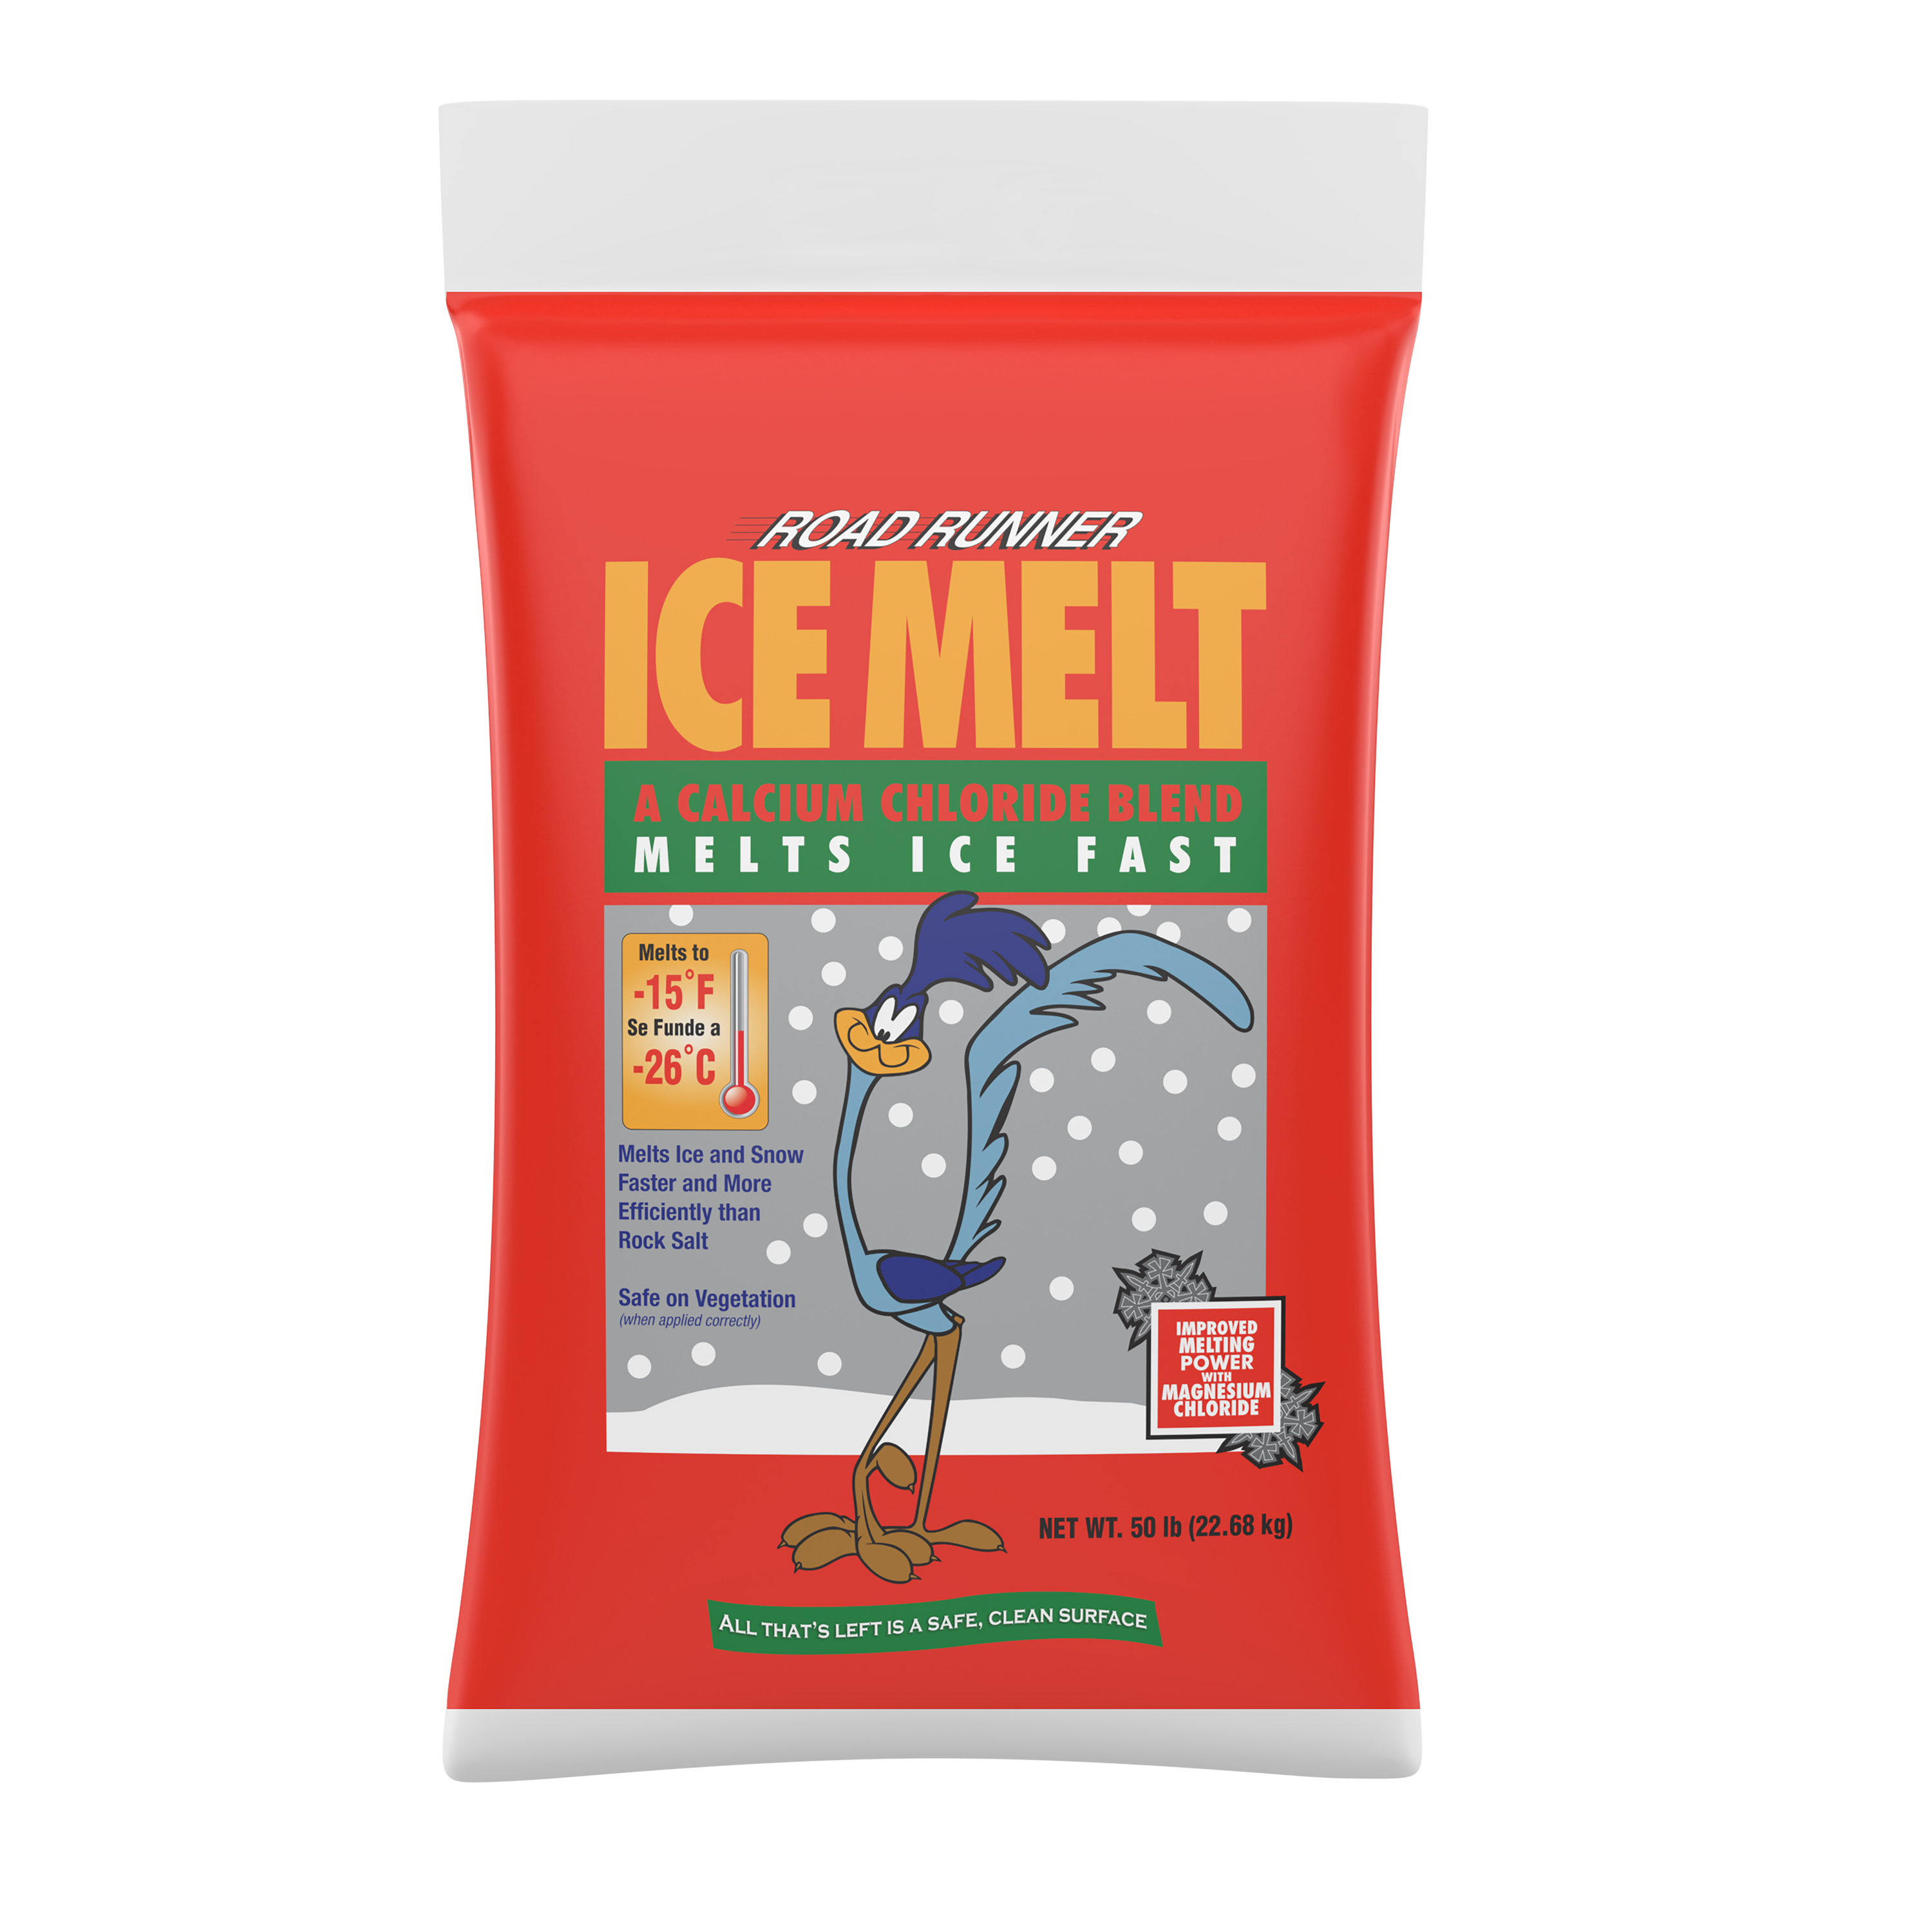 Road Runner Ice Melt (50 LB Bag) from Columbia Safety